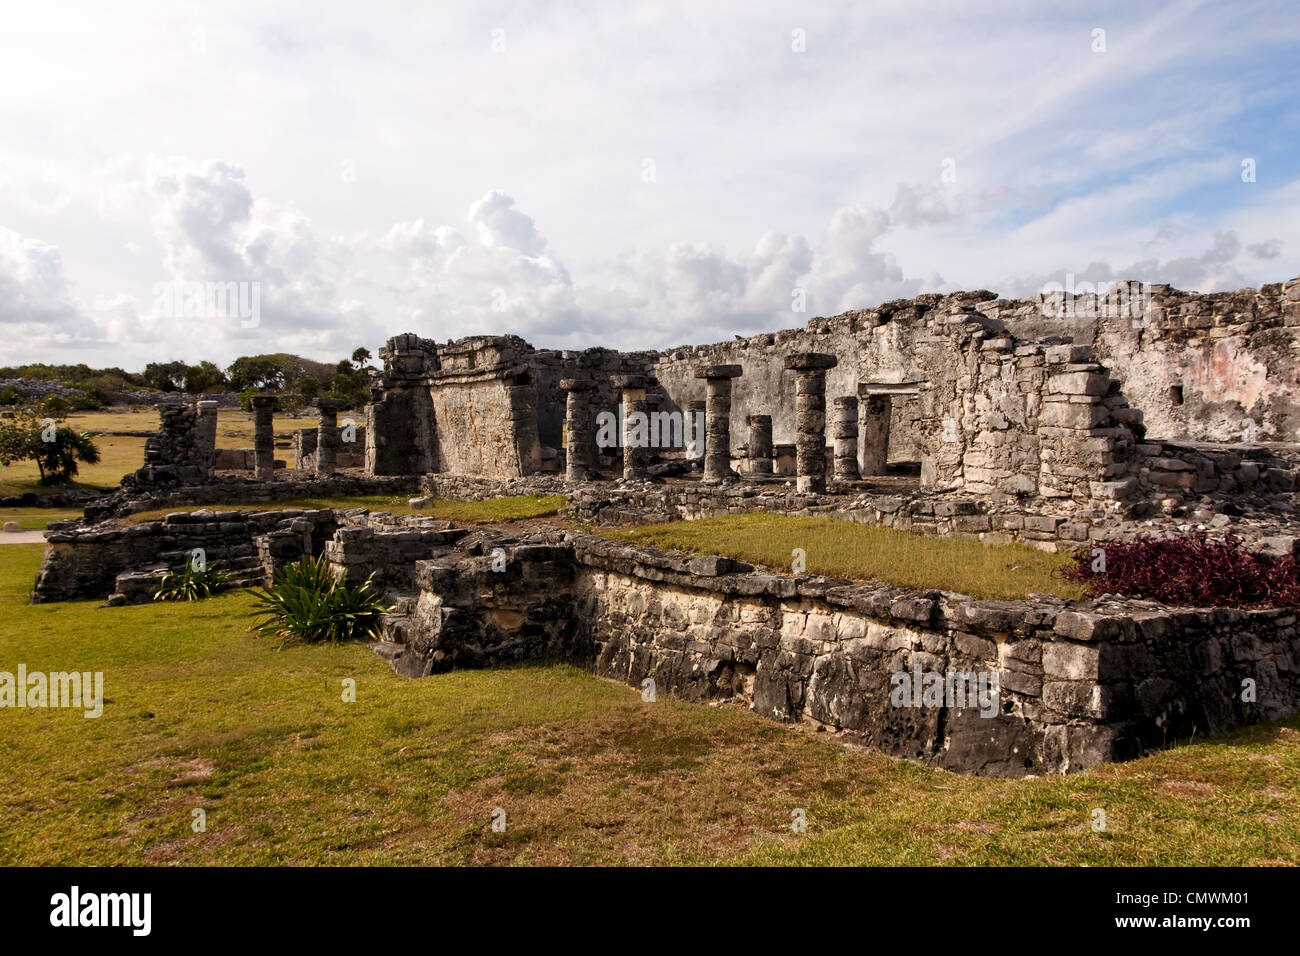 Crumbling remains of a large Mayan building at the archaeological zone of Tulum, Quintana Roo, Mexico. Stock Photo